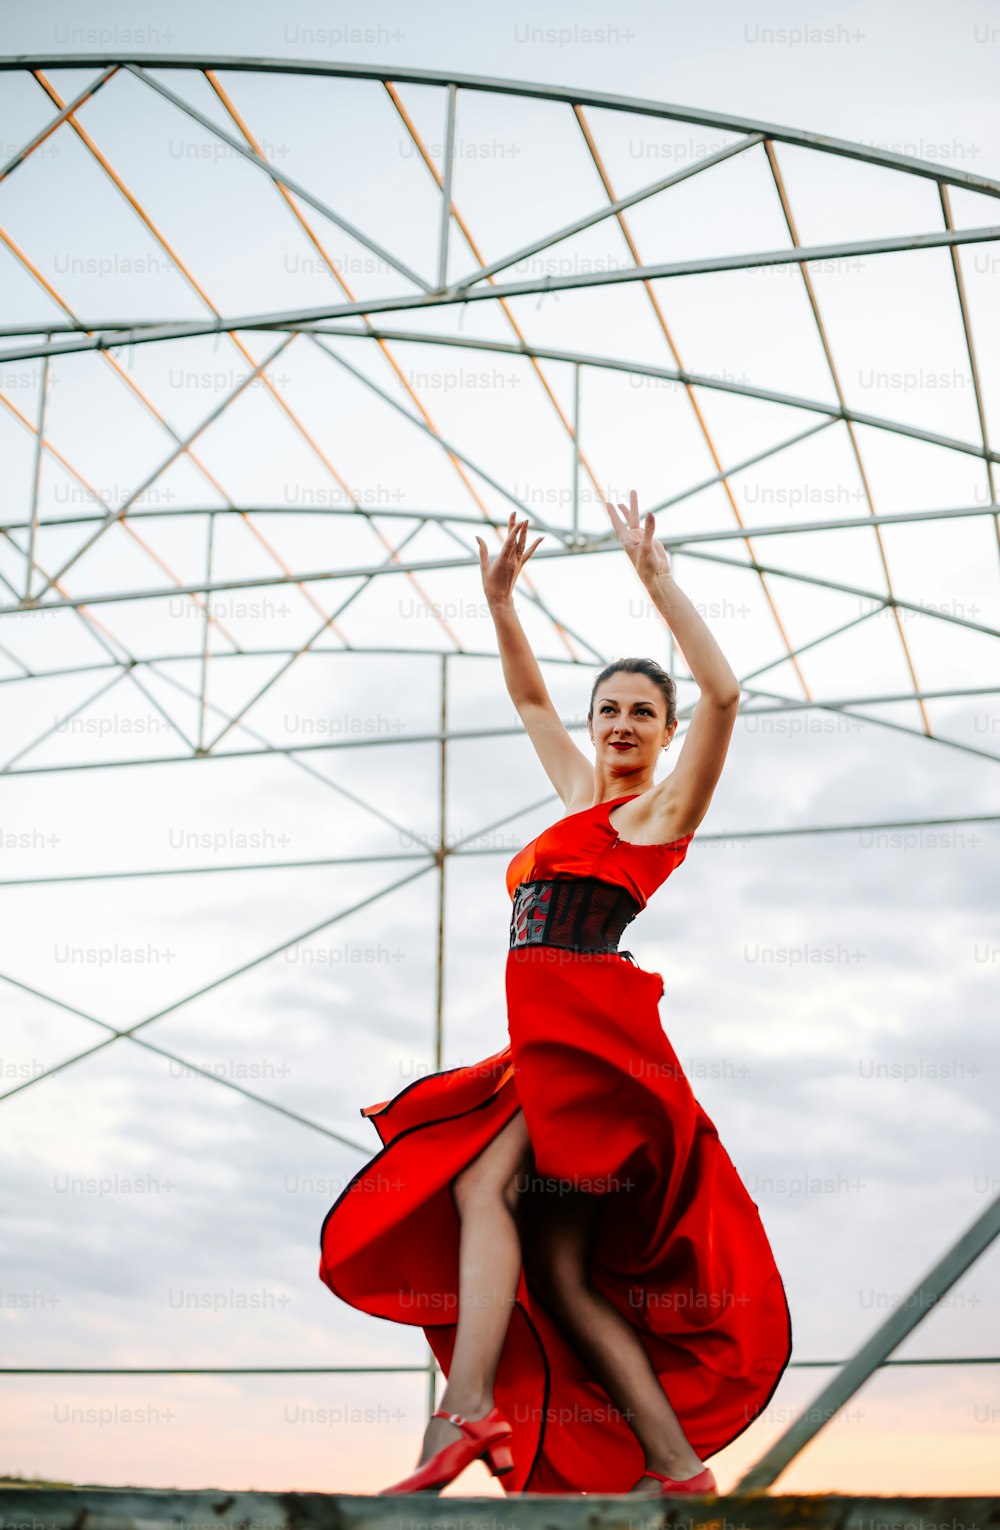 a woman in a red dress is jumping in the air